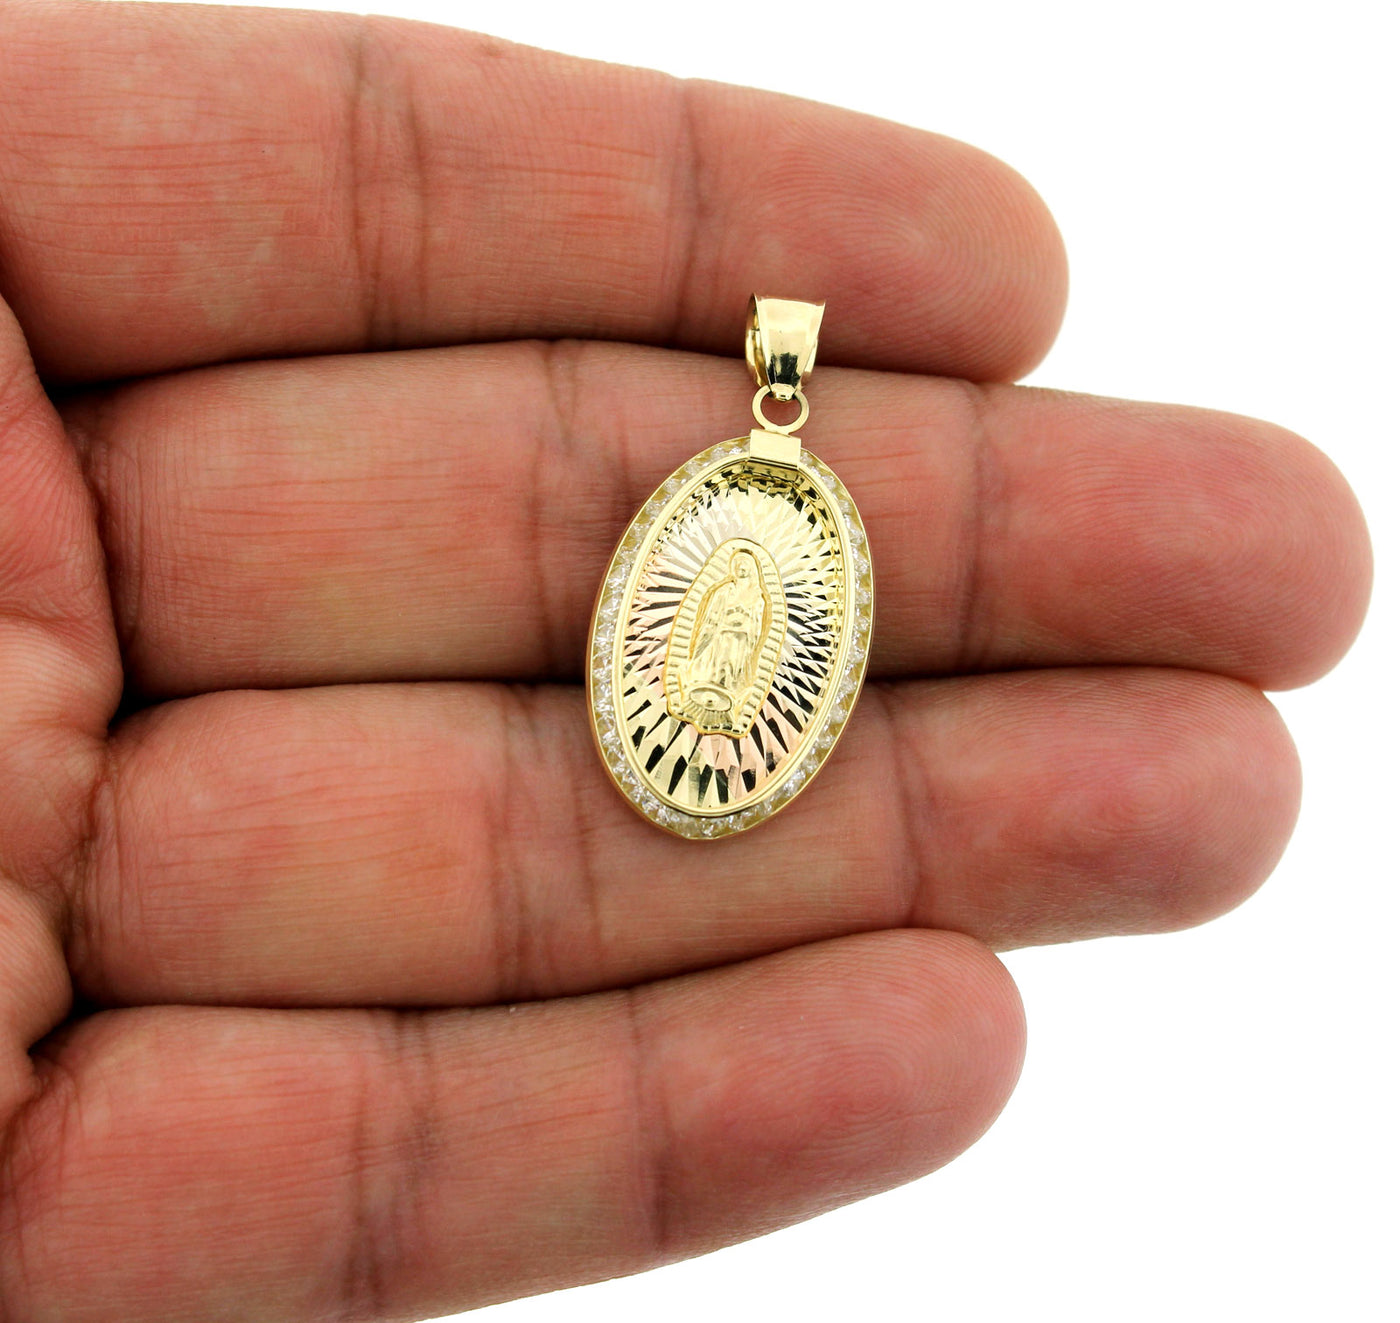 10K Solid Yellow Gold Virgin Mary Pendant Diamond Cut, Brand New, 10KT Real Gold